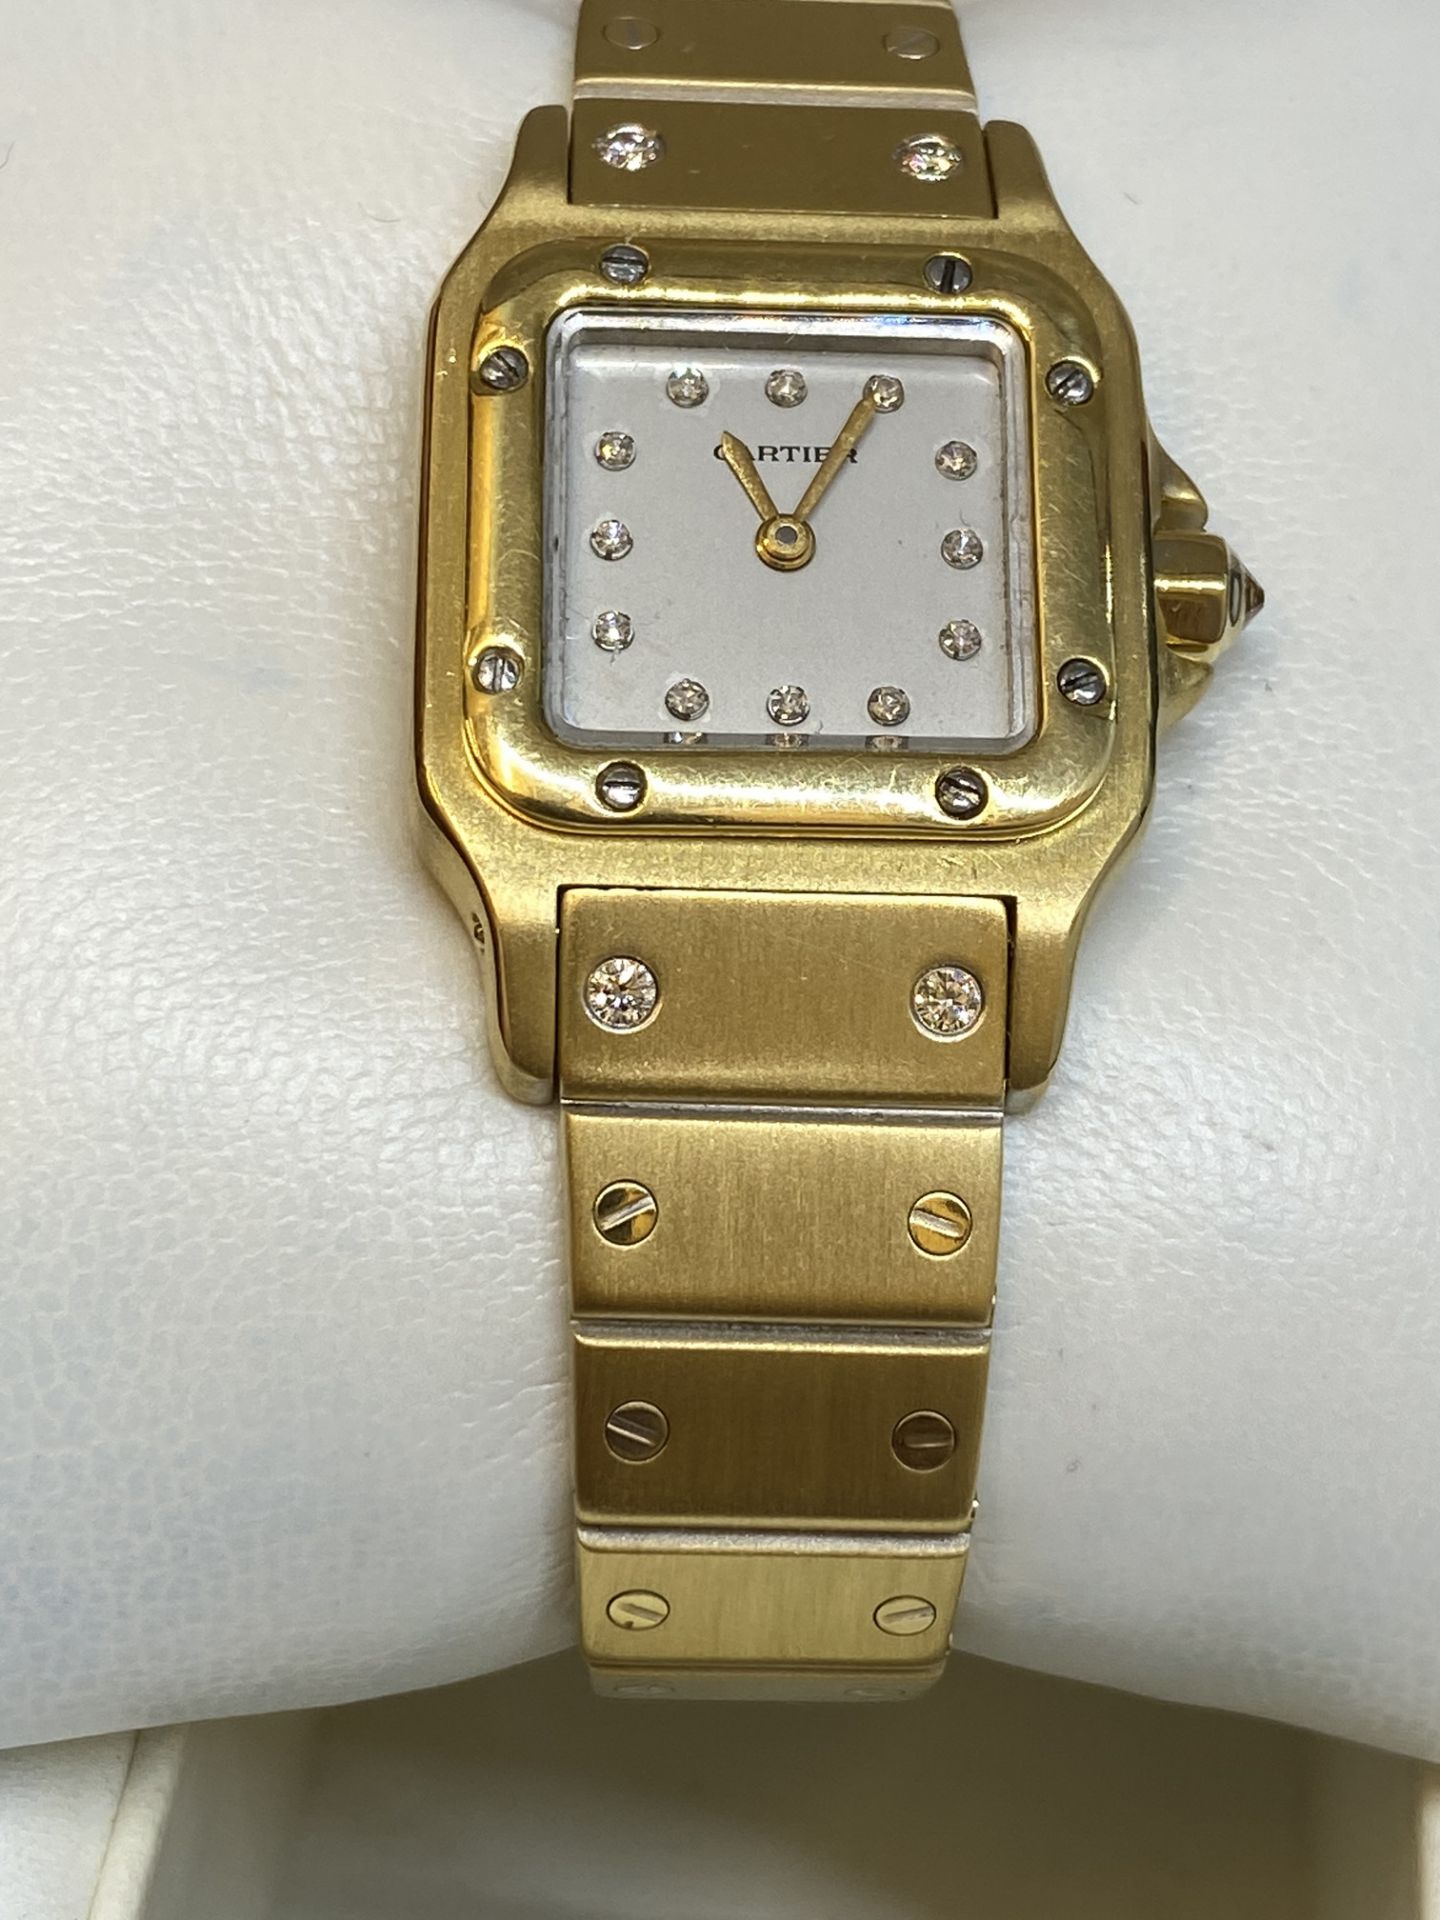 18ct GOLD SANTOS AUTOMATIC WATCH WITH BOX - Image 5 of 17